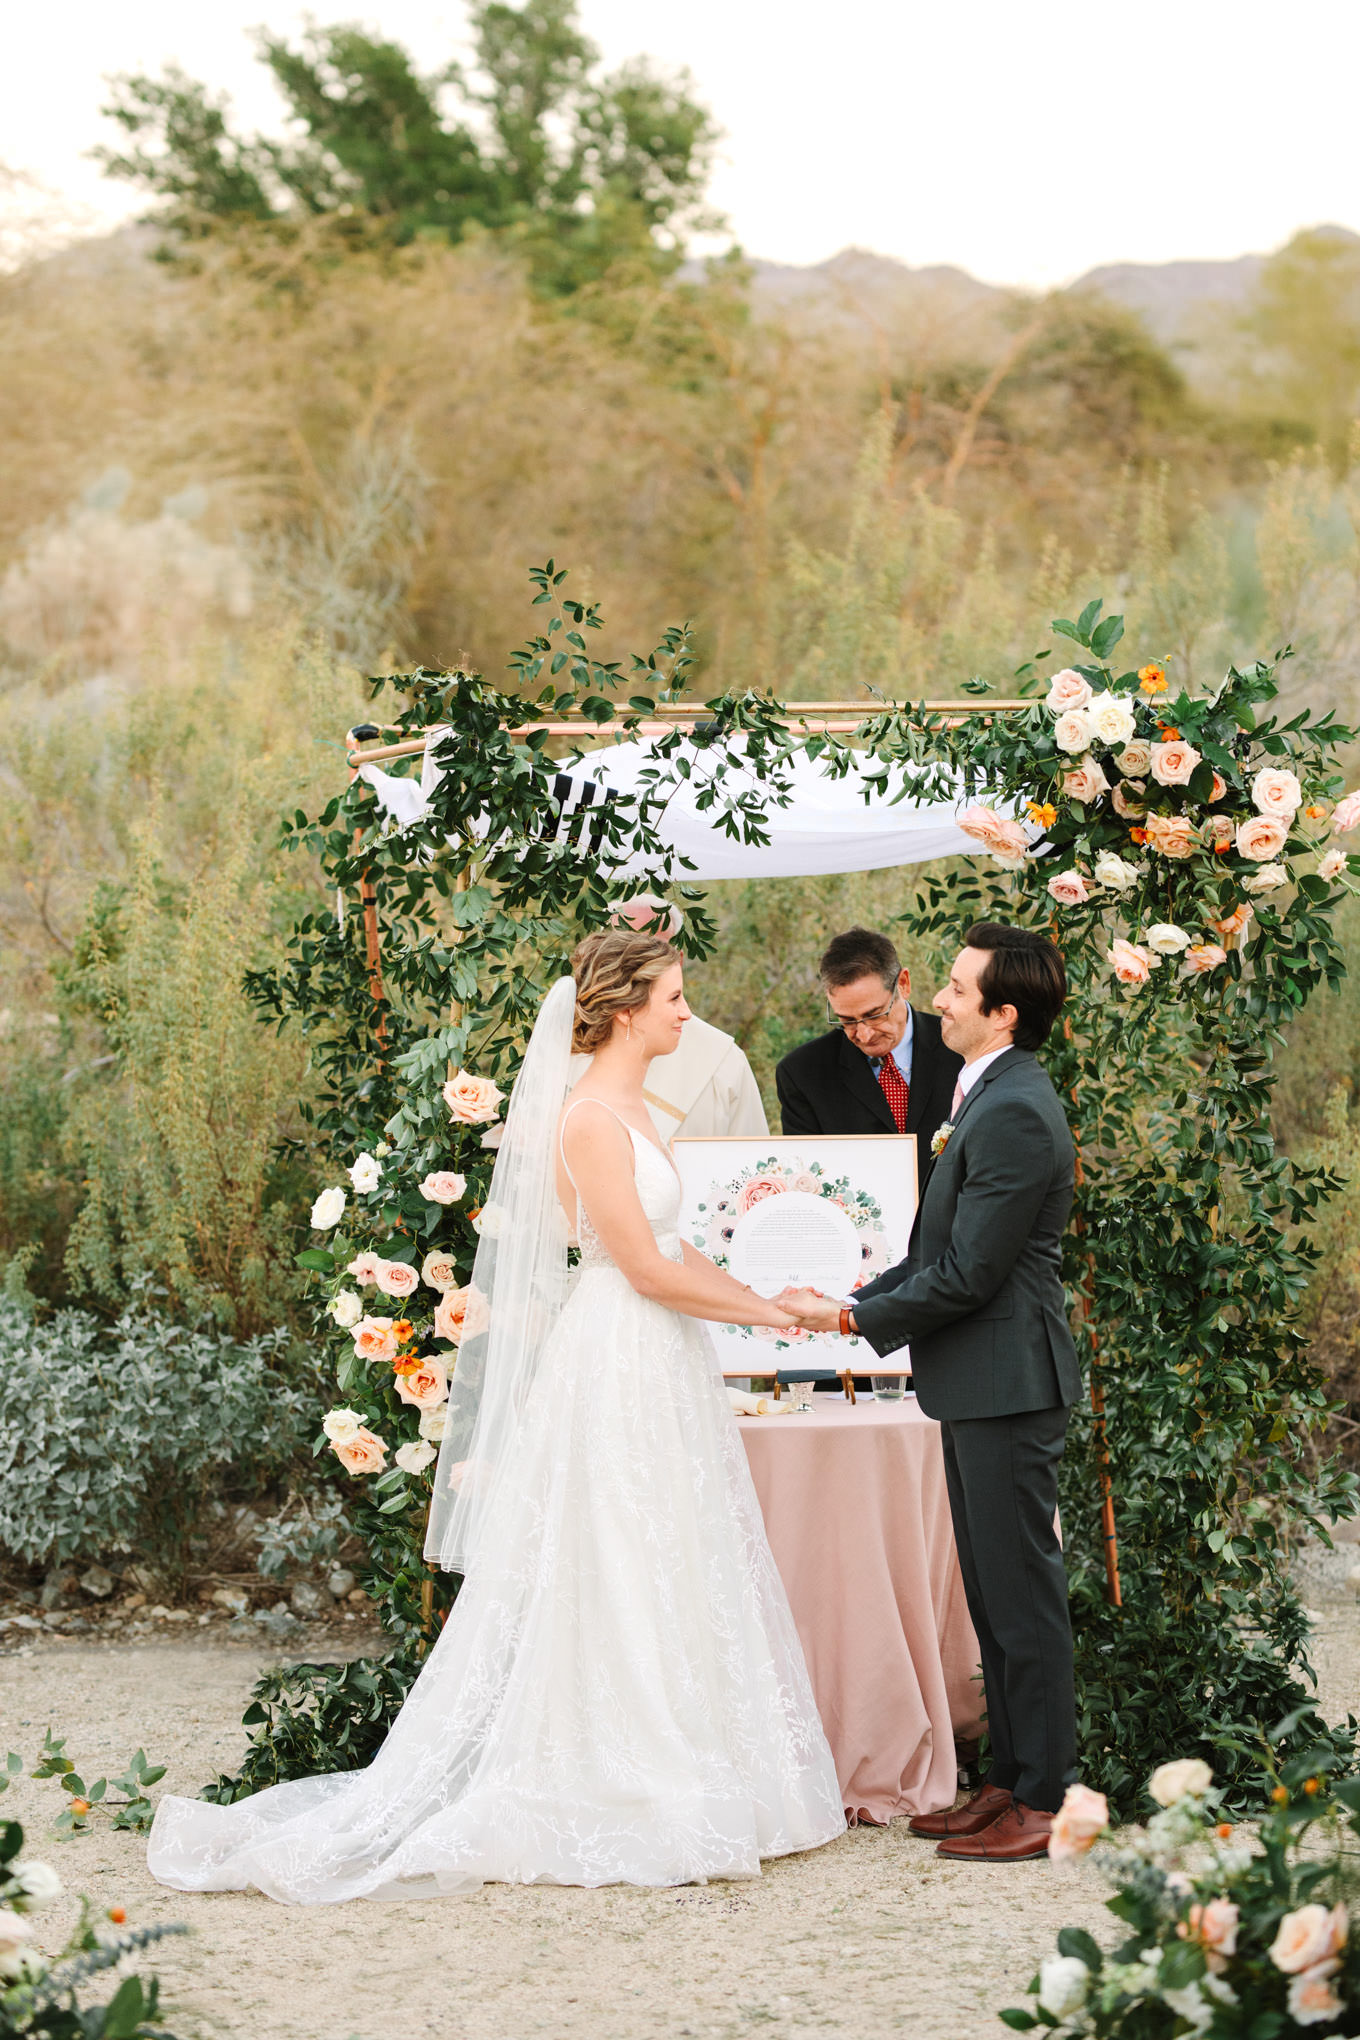 Bride and groom under wedding chuppah | Living Desert Zoo & Gardens wedding with unique details | Elevated and colorful wedding photography for fun-loving couples in Southern California |  #PalmSprings #palmspringsphotographer #gardenwedding #palmspringswedding  Source: Mary Costa Photography | Los Angeles wedding photographer 